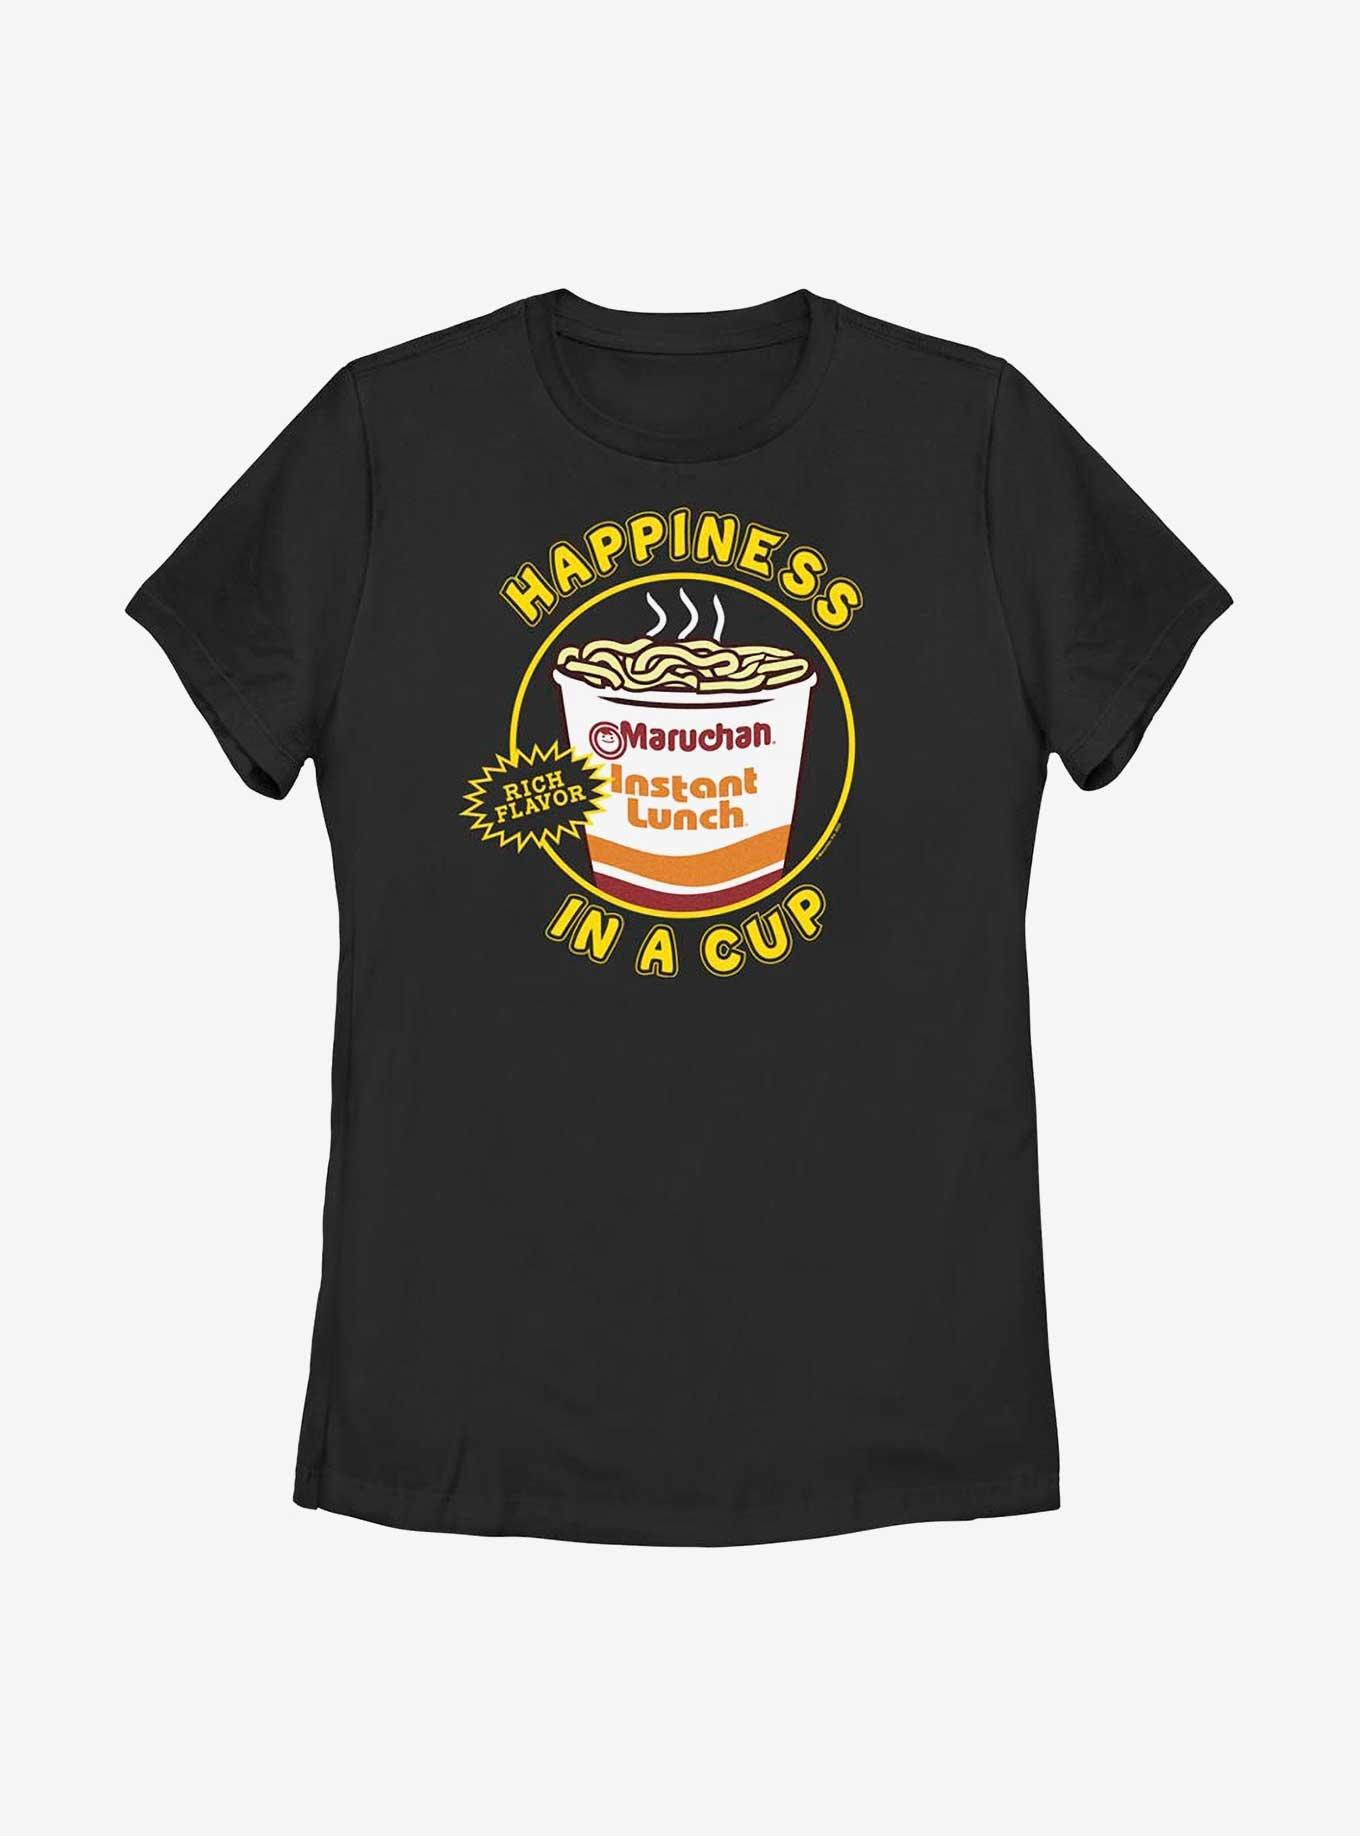 Maruchan Happiness In A Cup Womens T-Shirt, BLACK, hi-res